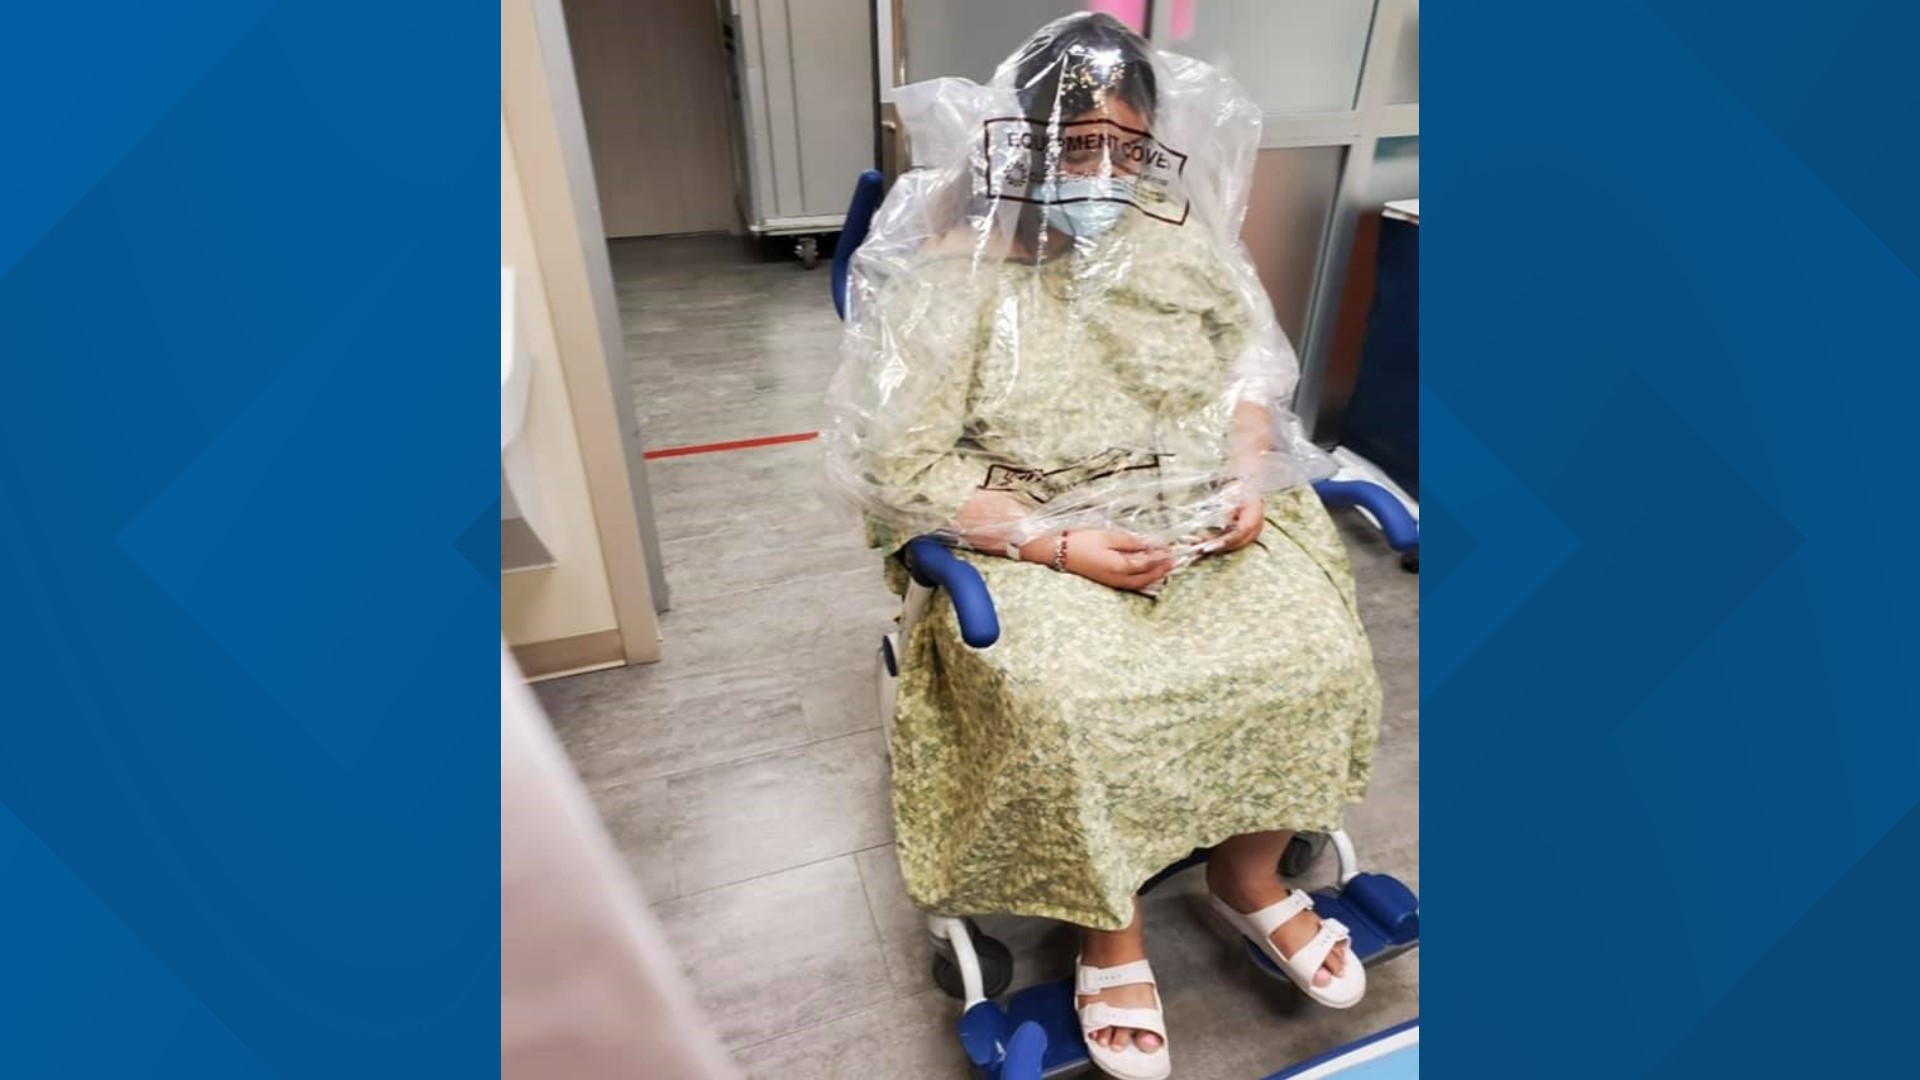 MCH addresses social post of girl with bag over her head taken their hospital | newswest9.com